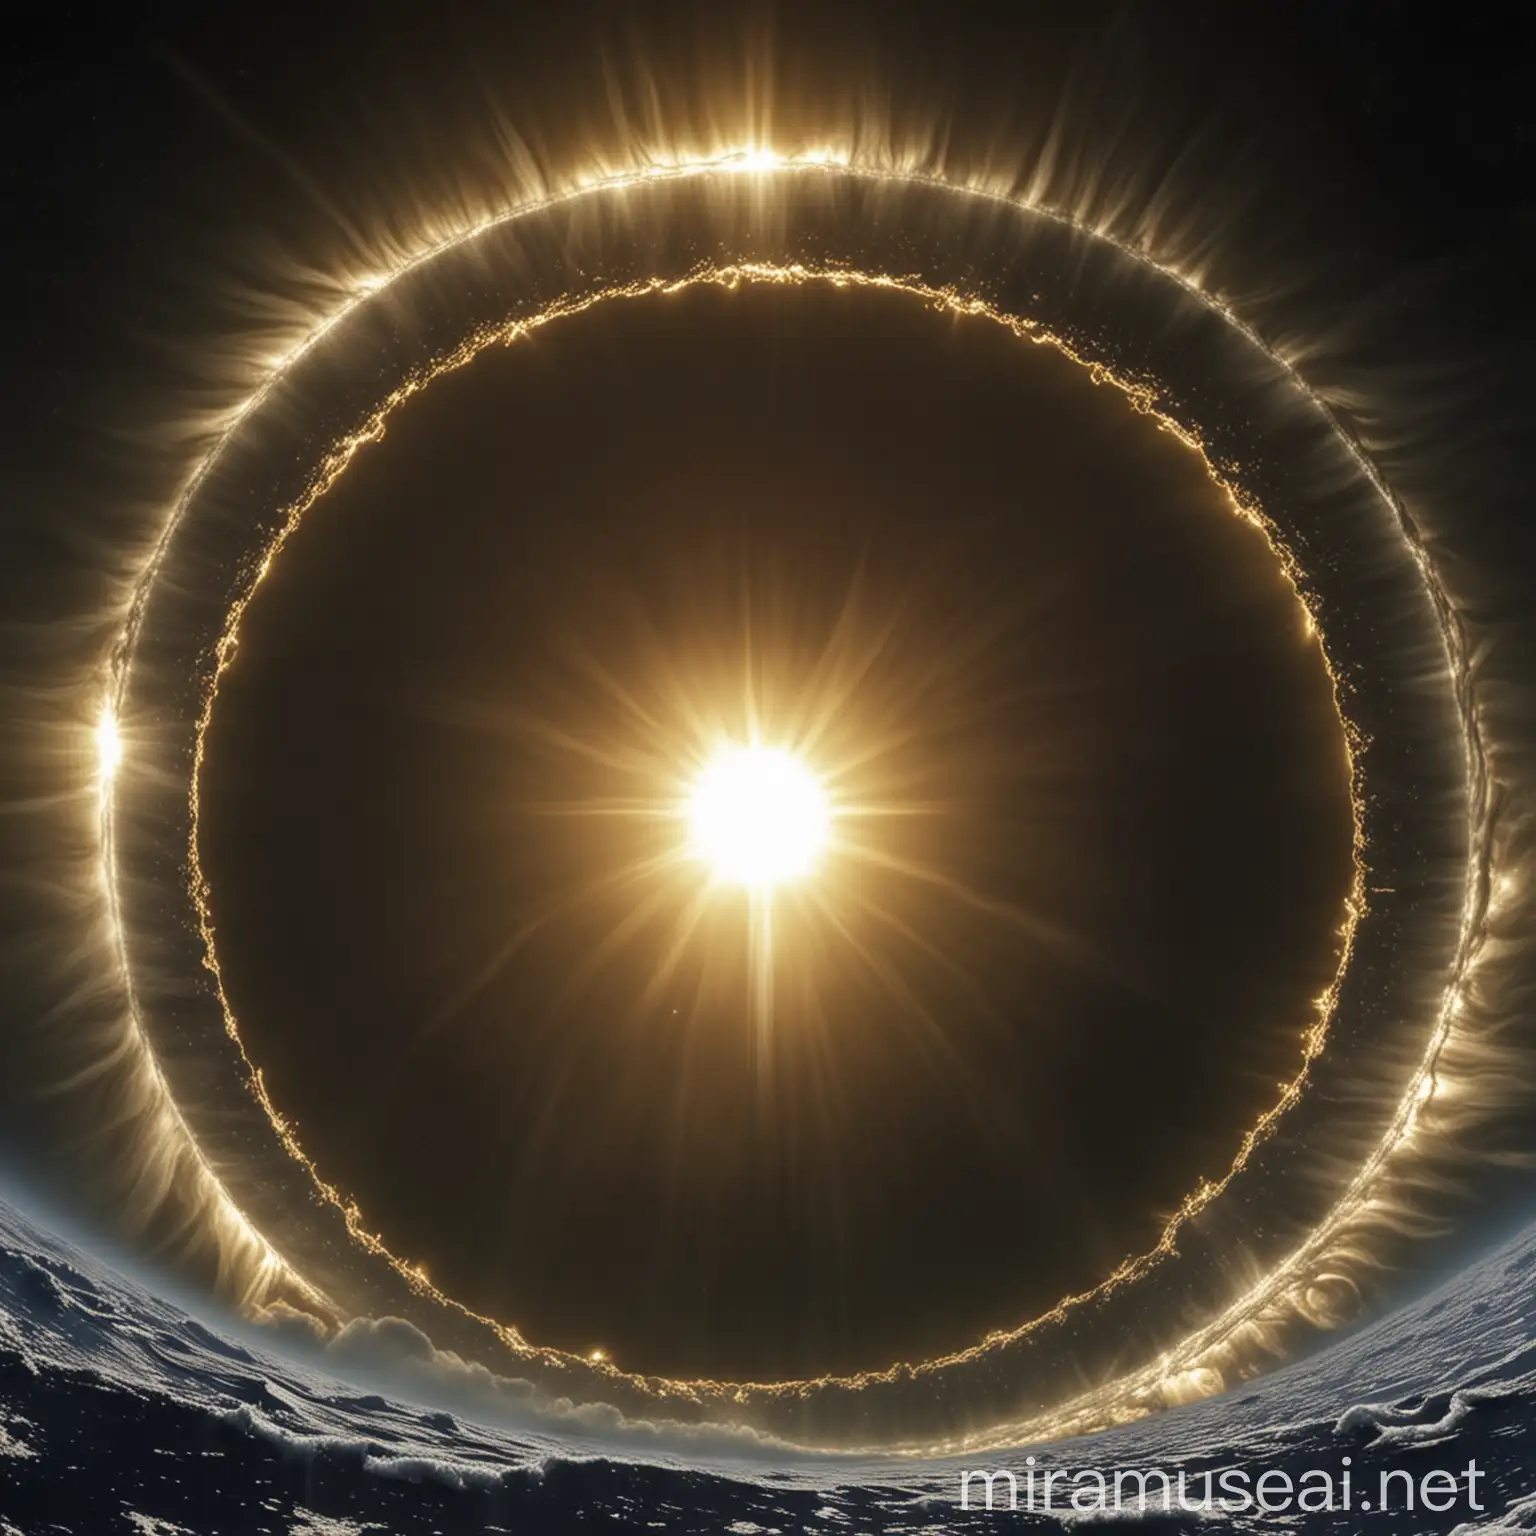 Sun Encircled by Vast Oceans and Continents